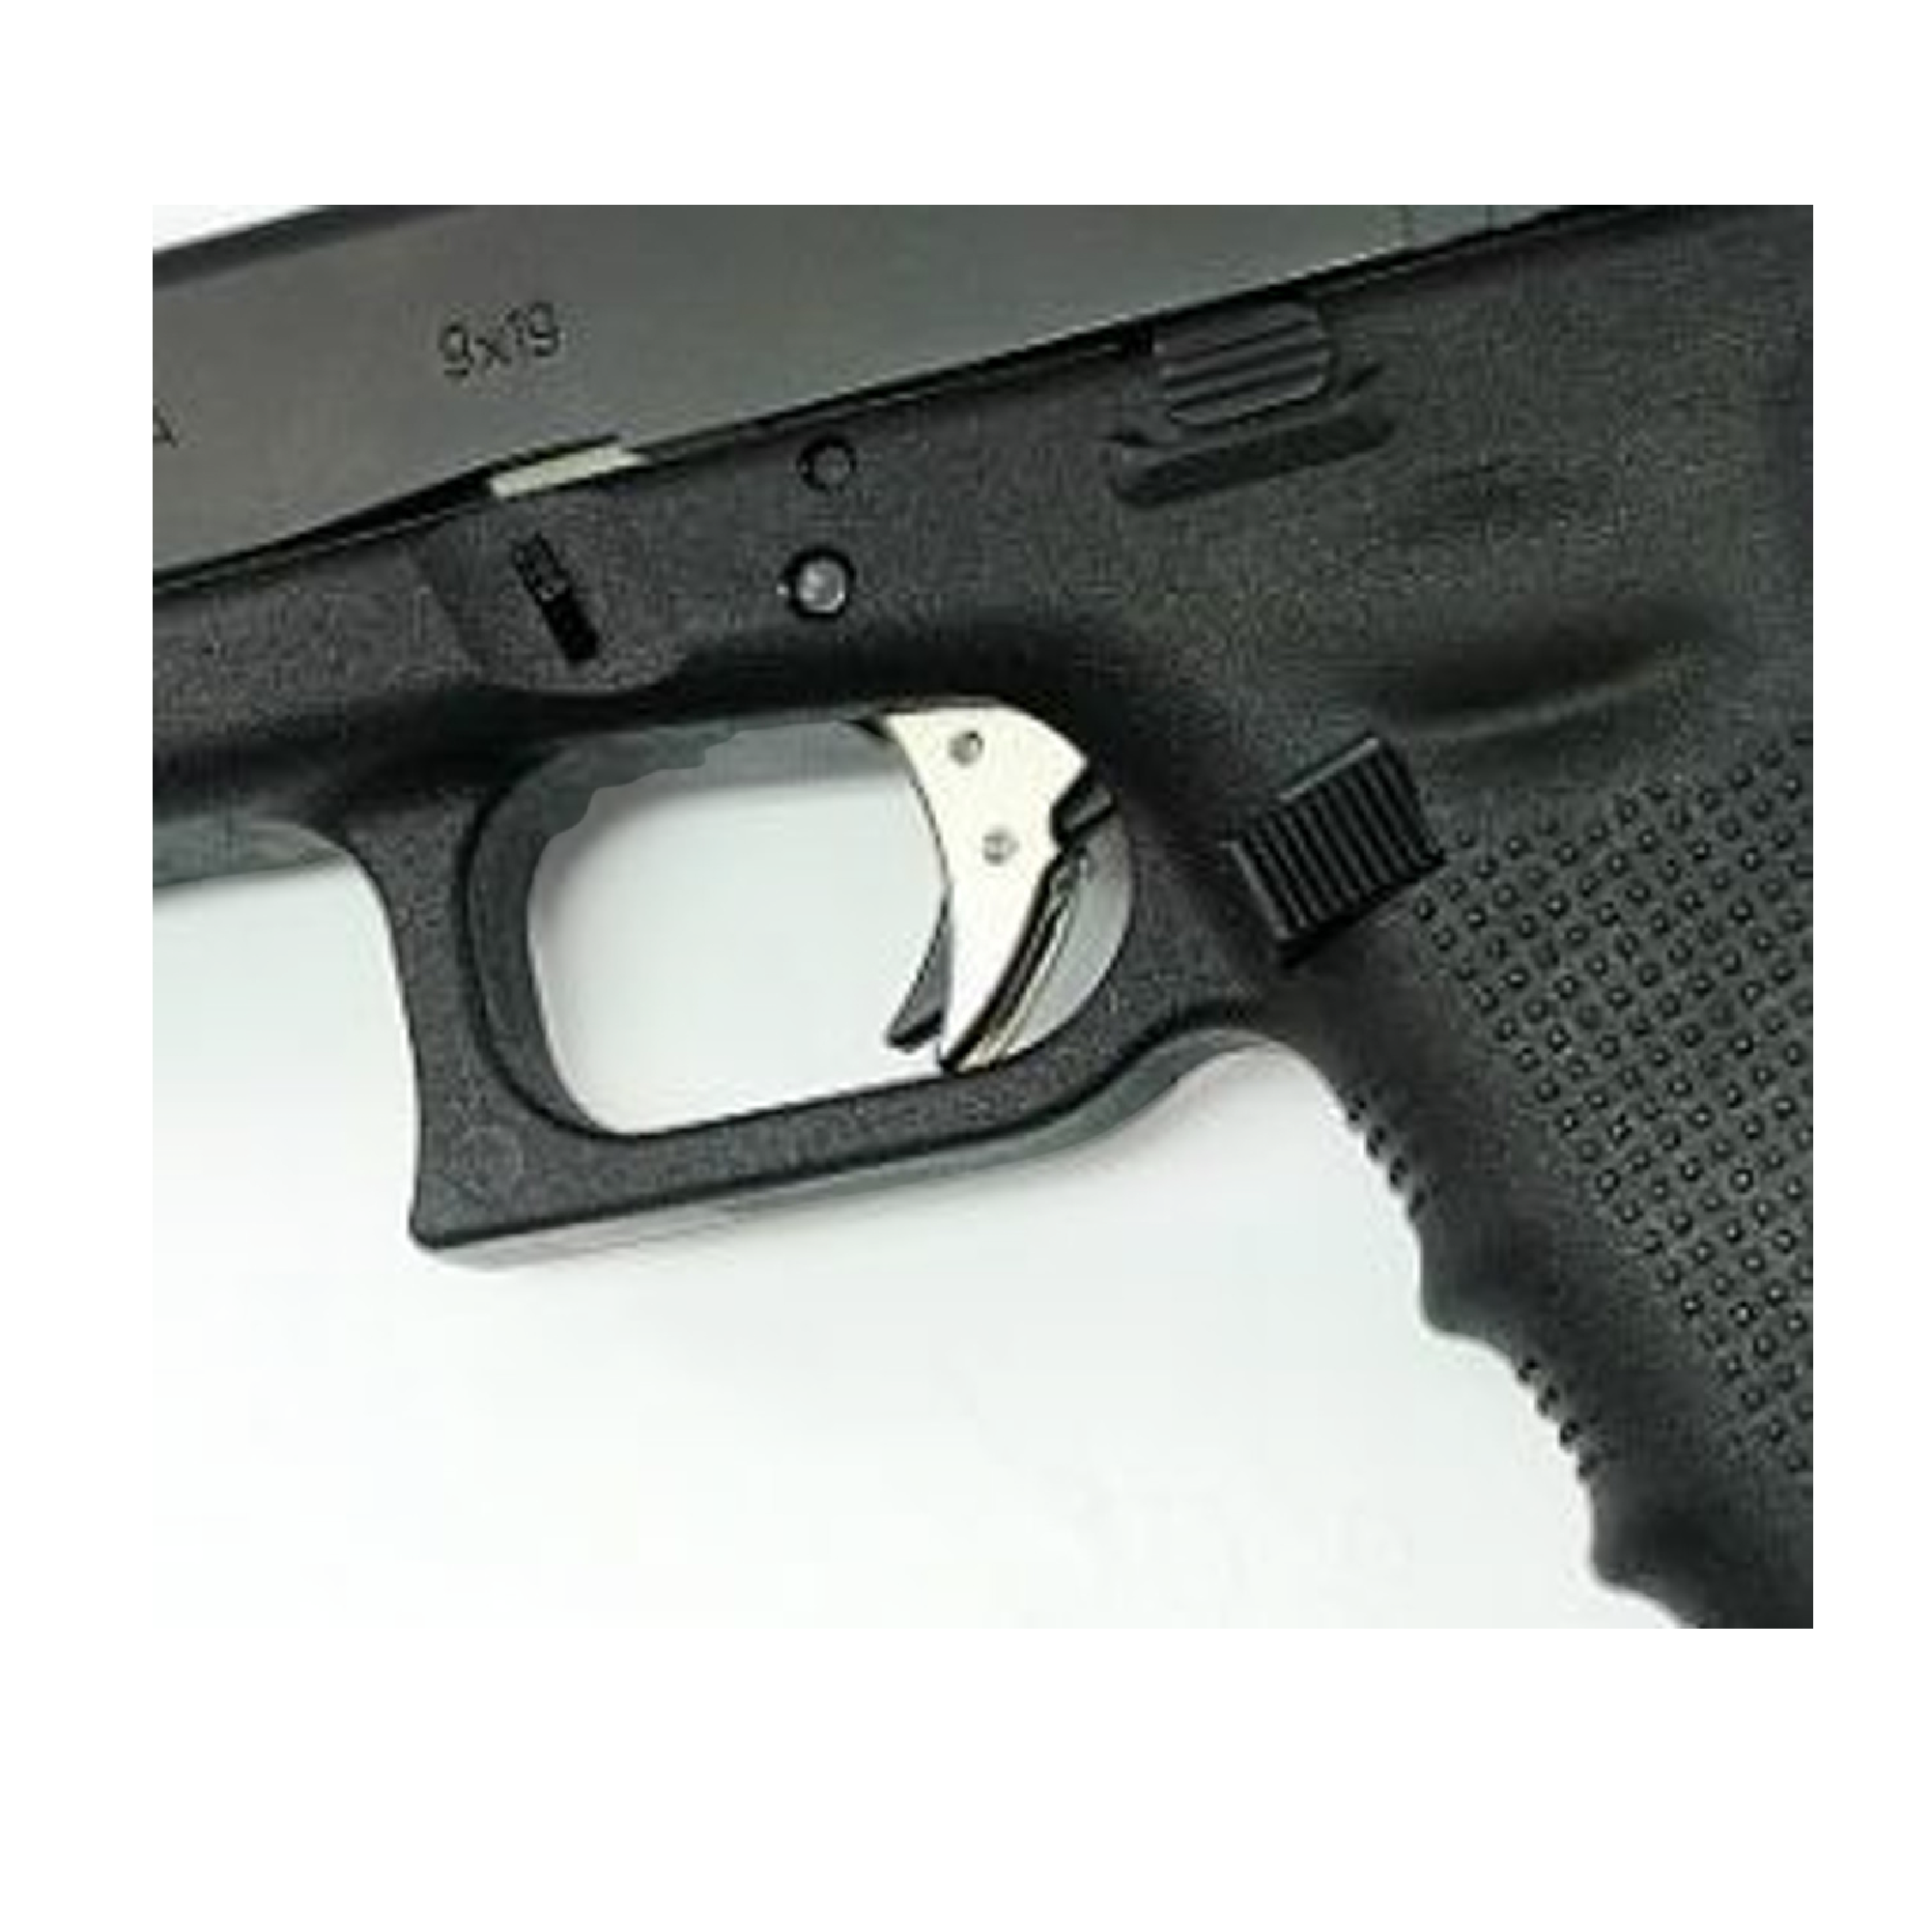 glock extended clip png